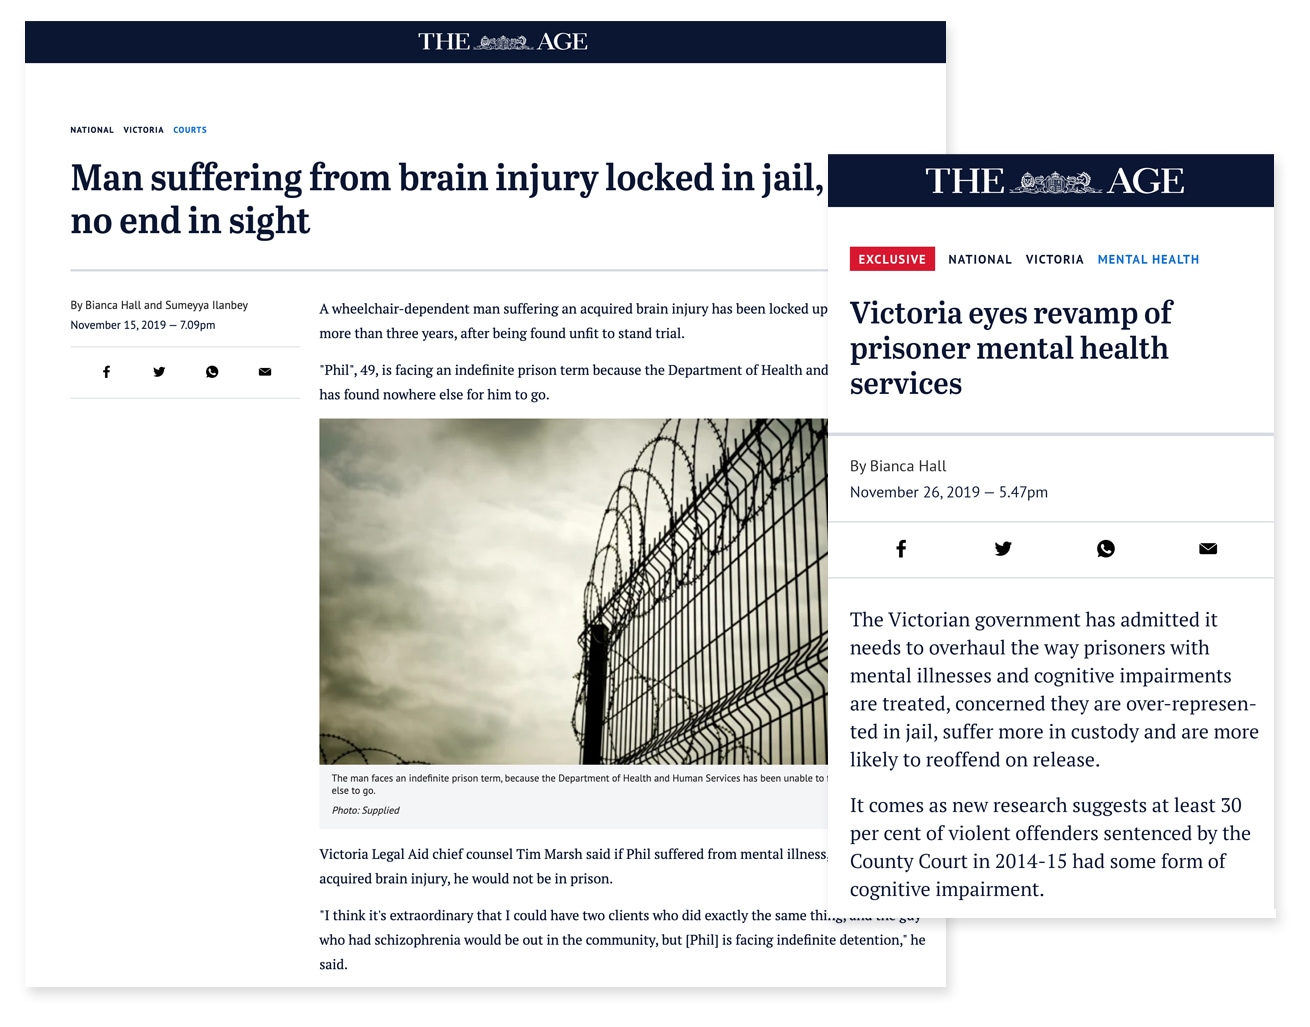 Screenshots of articles from The Age, with headlines including "Man suffering from brain injury locked in jail, no end in sight" and "Victoria eyes revamp of prisoner mental health services".